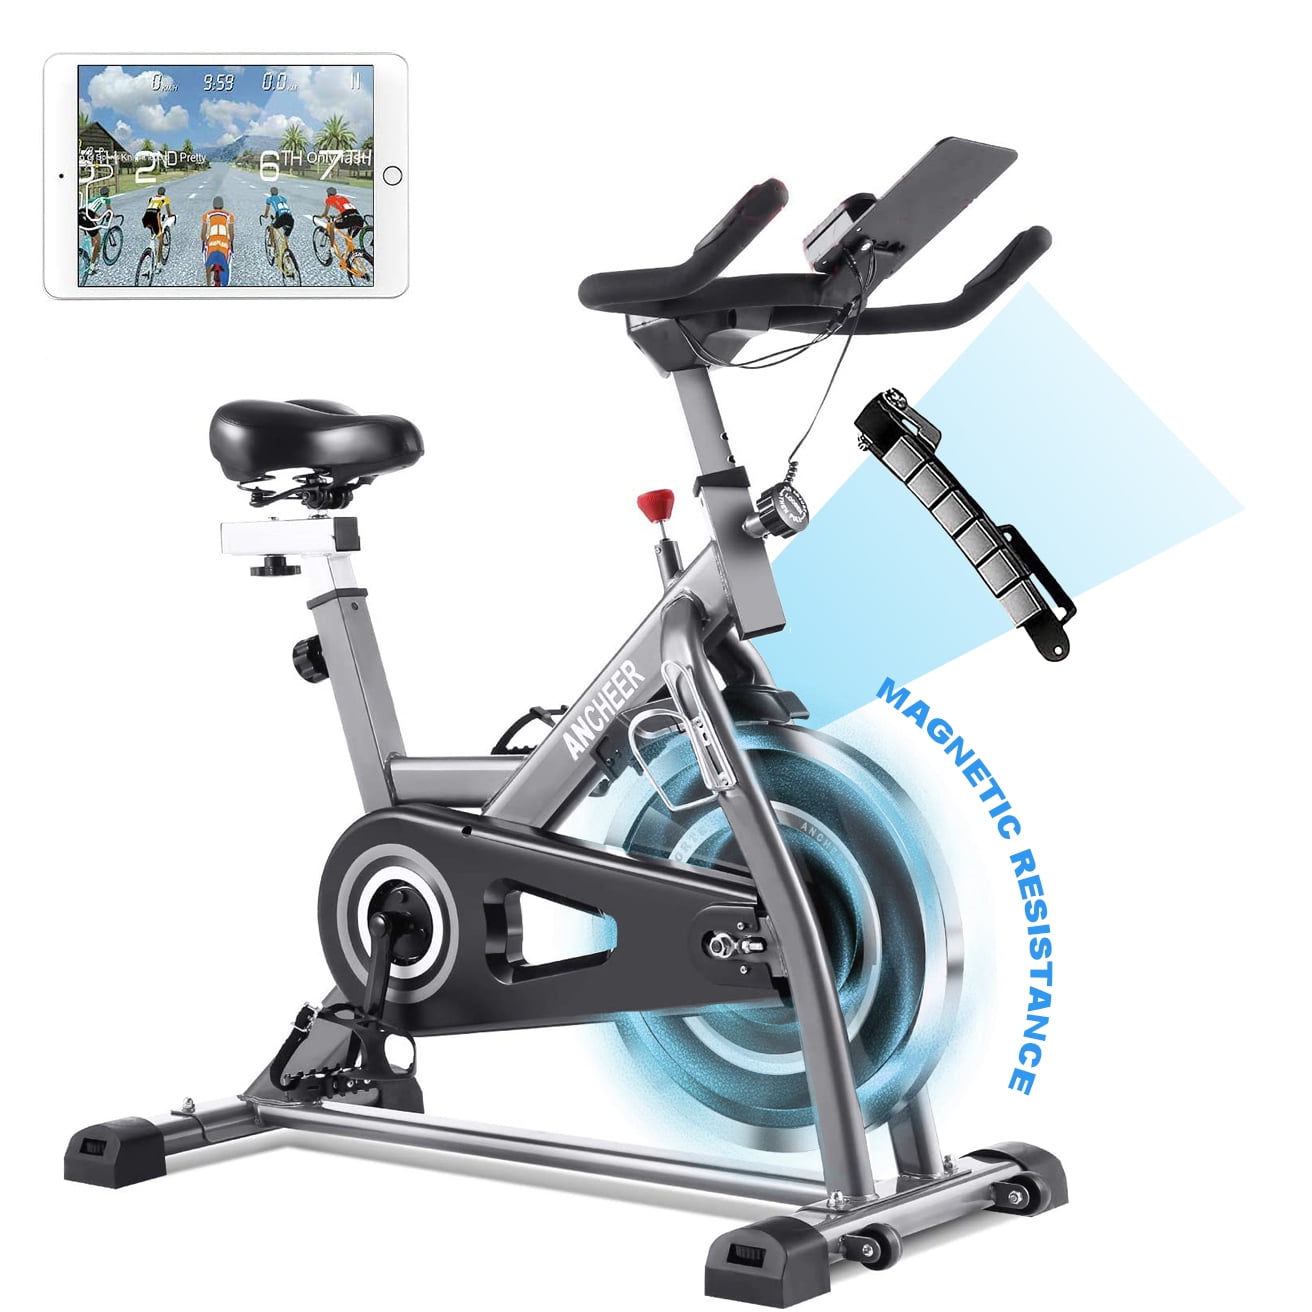 Details about   Under Desk Bike Pedal Exerciser Exercise Bike Stationary Magnetic Cycle Blue New 